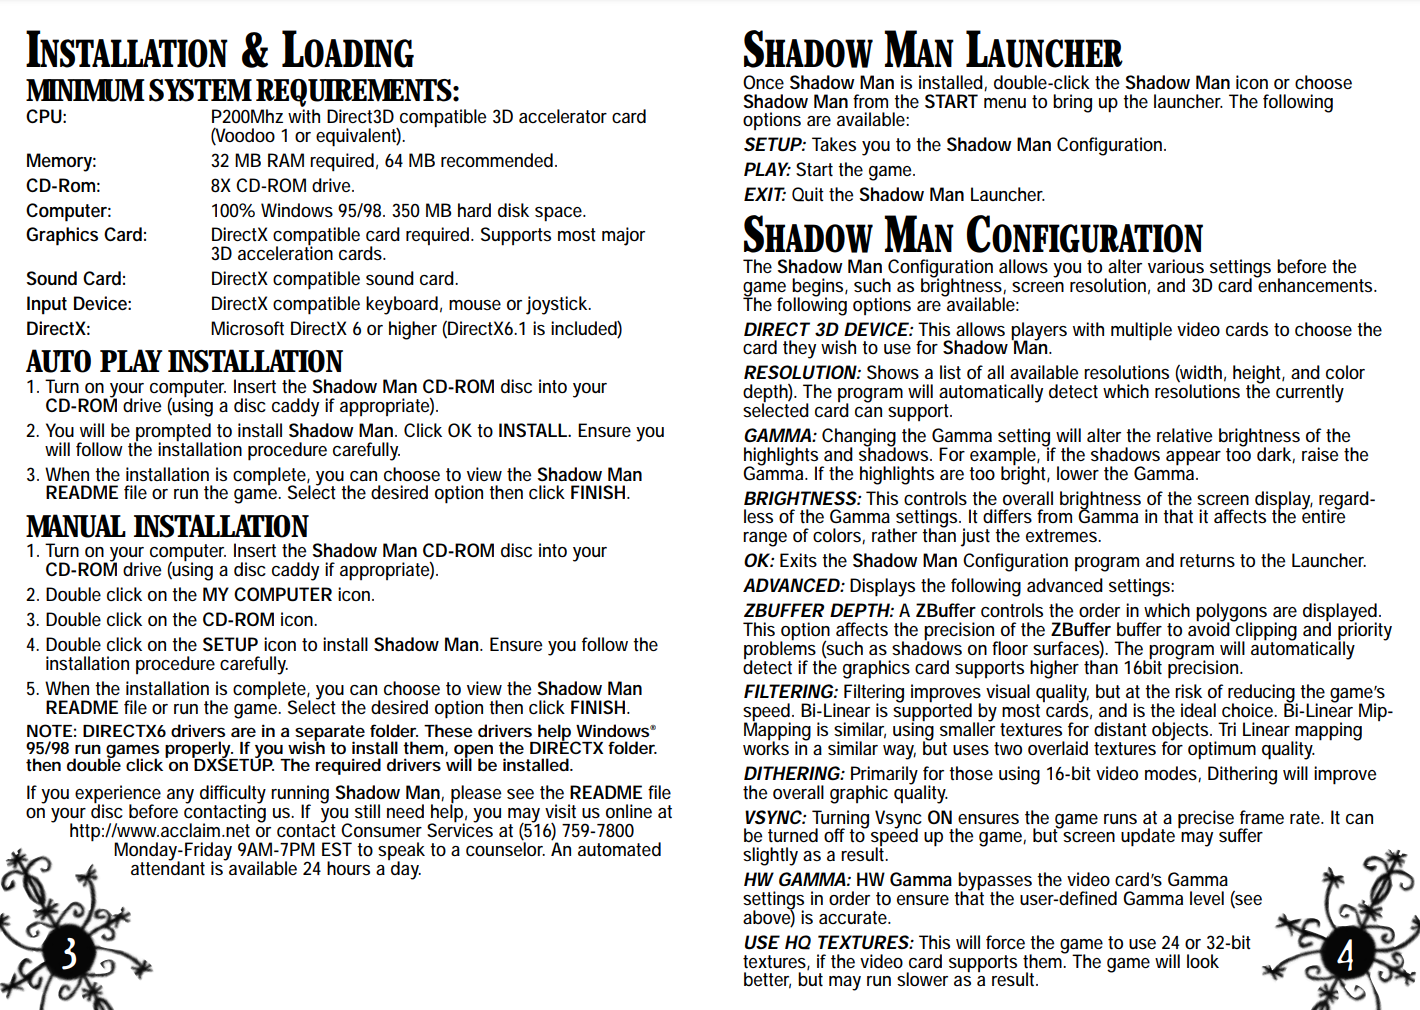 Shadow Man Remastered User's Manual: Classic. - Page Three-Four: